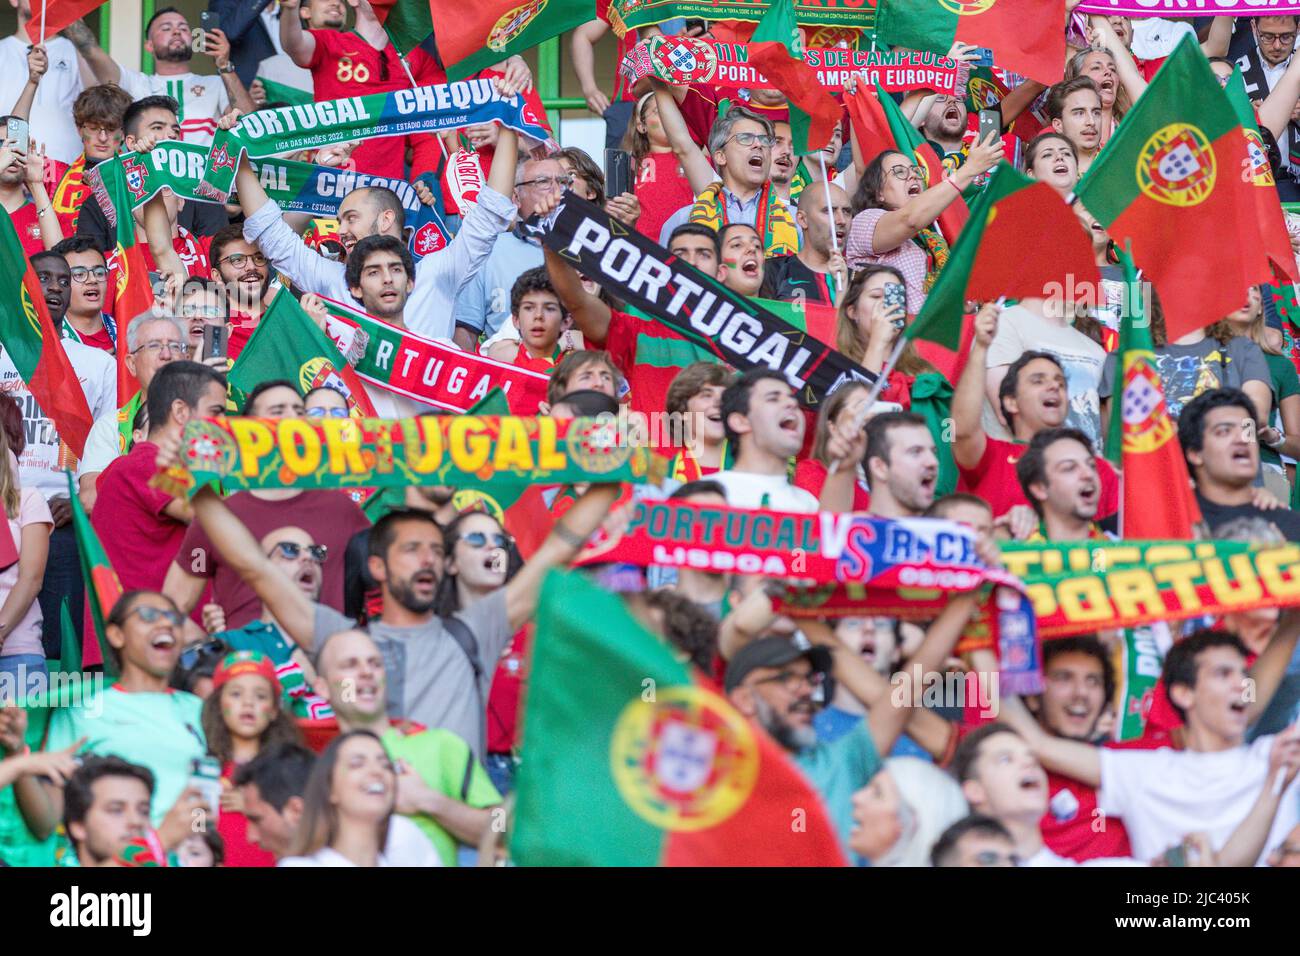 June 09, 2022. Lisbon, Portugal. Portugal supporters during the UEFA Nations League Final Tournament between Portugal and Czechia Credit: Alexandre de Sousa/Alamy Live News Stock Photo